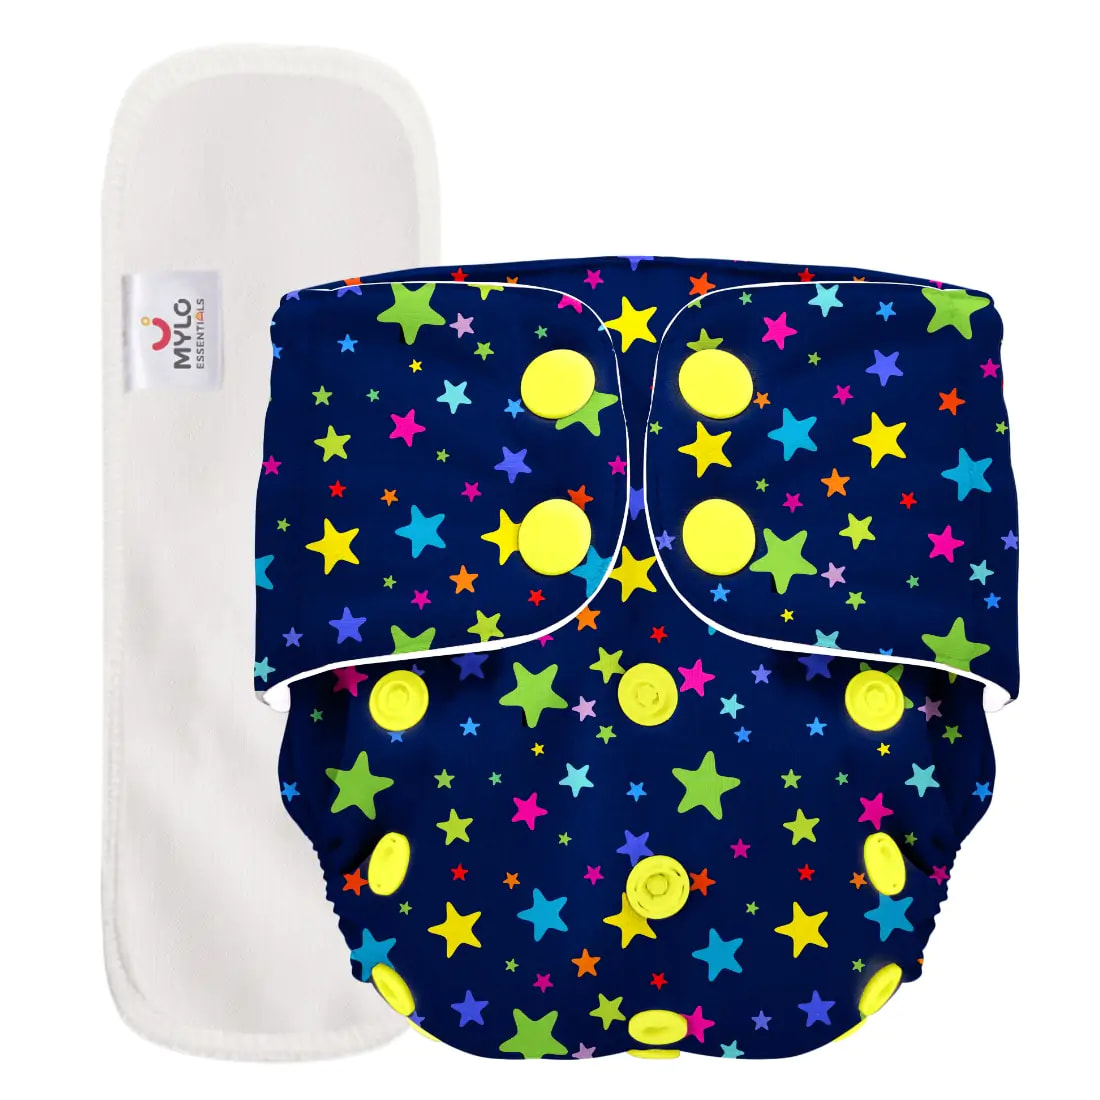 Adjustable Washable & Reusable Top lay Cloth Diaper with SmartCuff Technology for Enhanced Leak Protection-Comes with 1 Dry Feel Absorbent Insert Pad  (3M-3Y)- Twinkle Twinkle